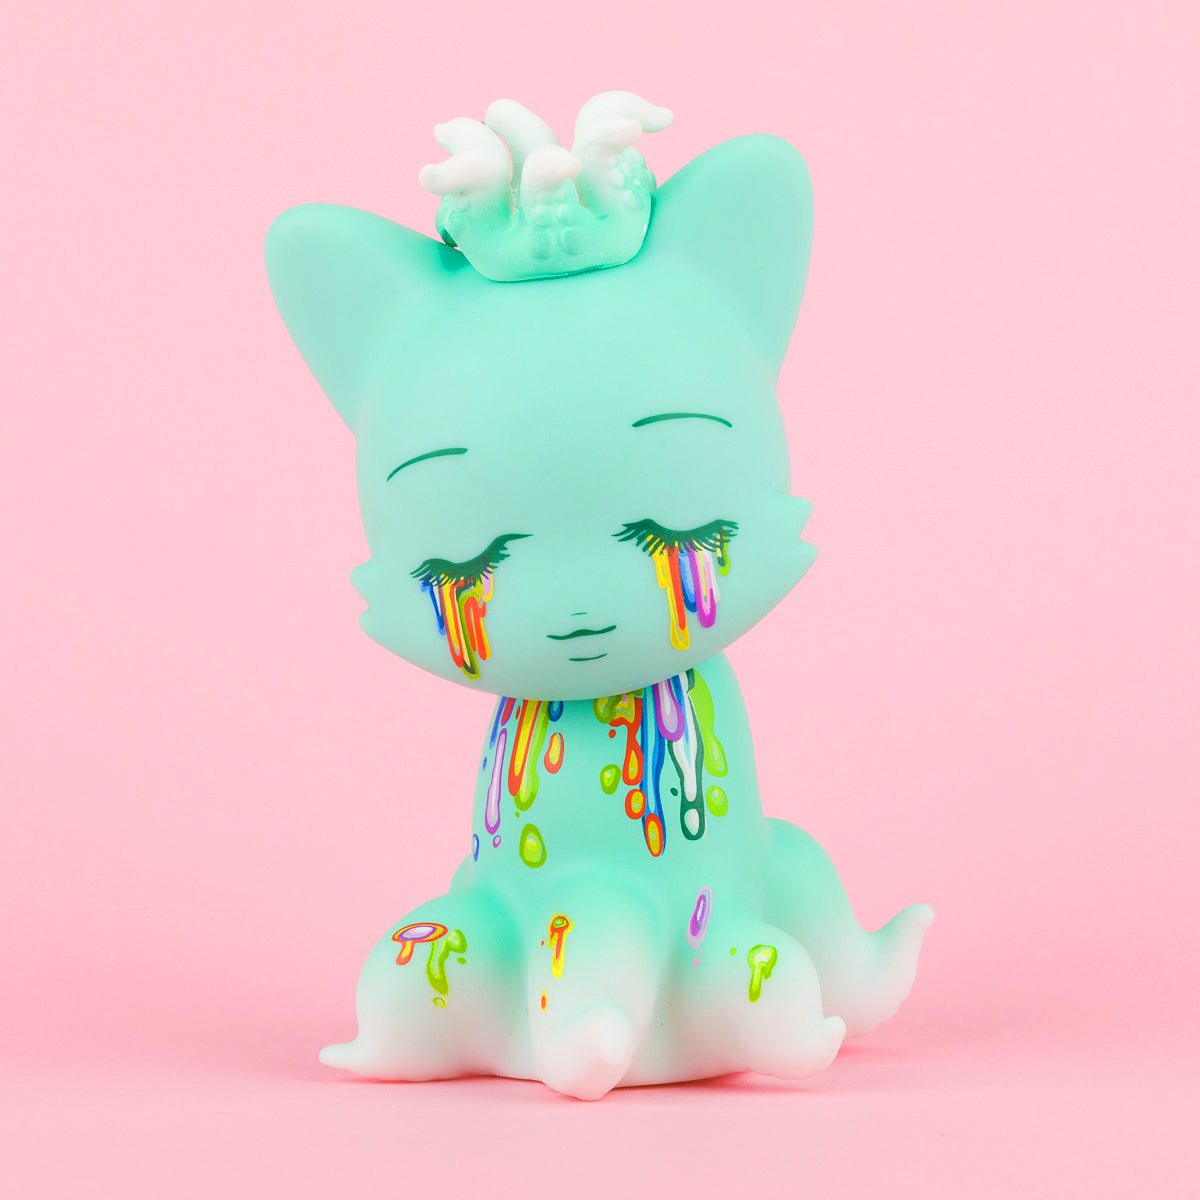 Tentaclanky Tears Janky Vinyl Art Toy By Camilla D'Errico for Superplastic